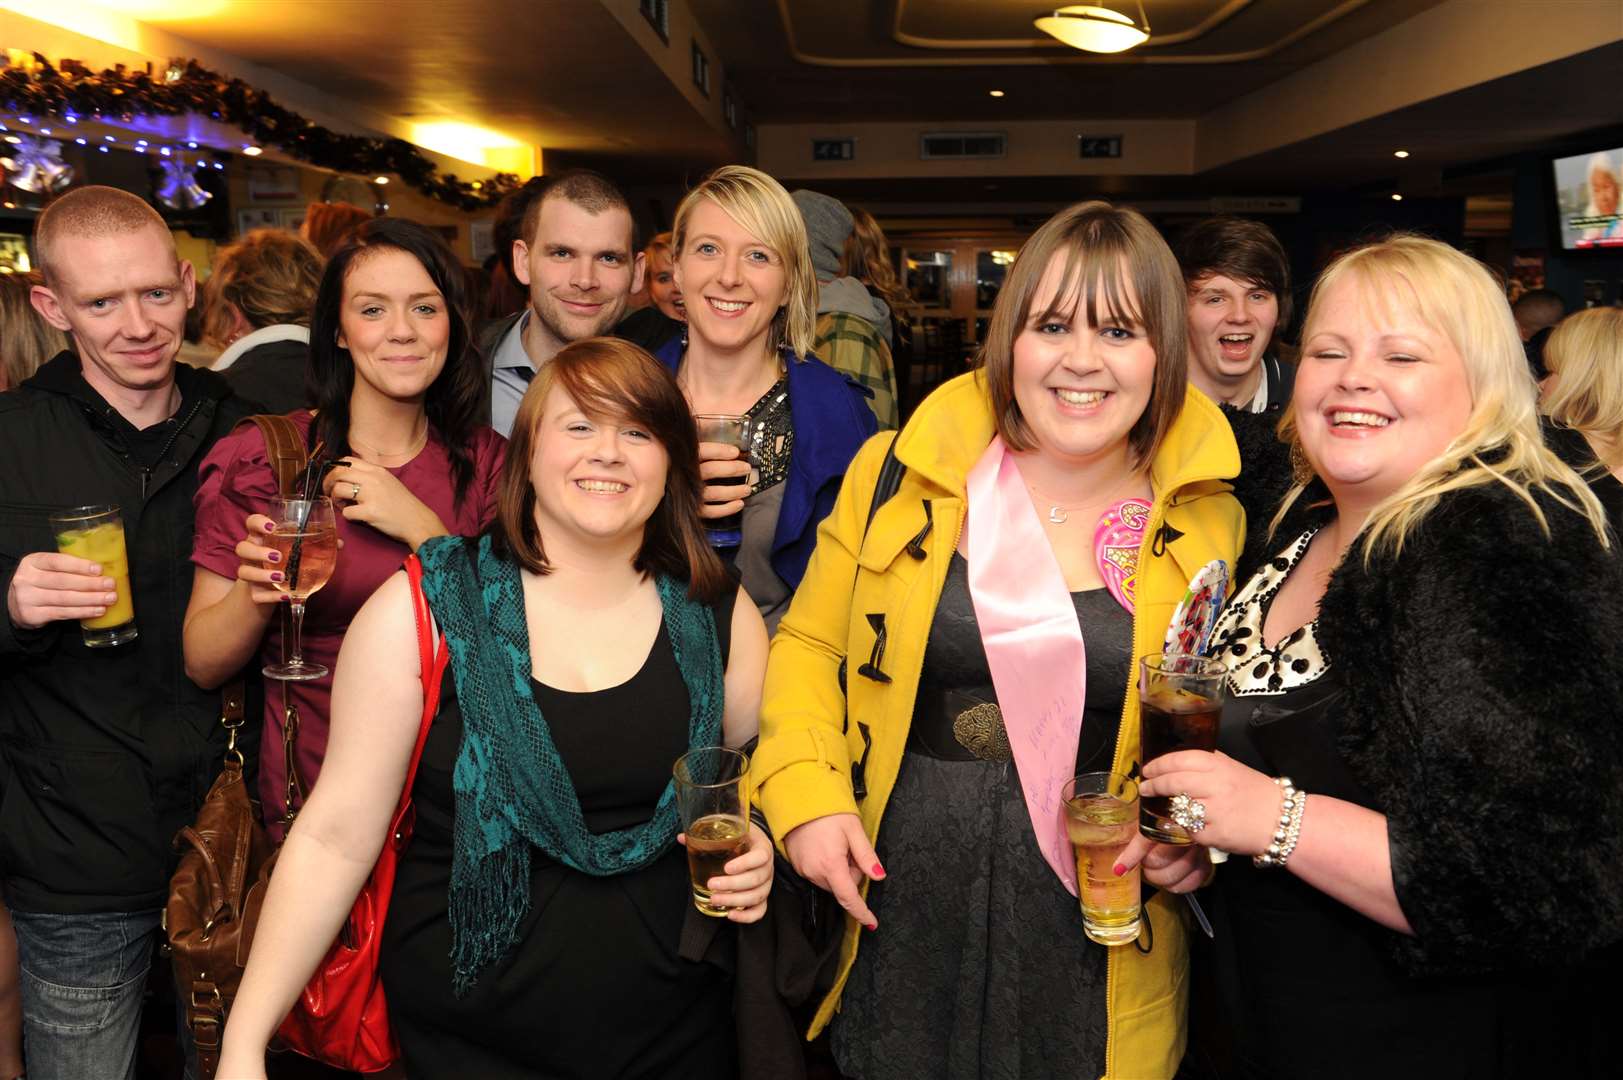 14 photographs from a 2011 night out in Inverness